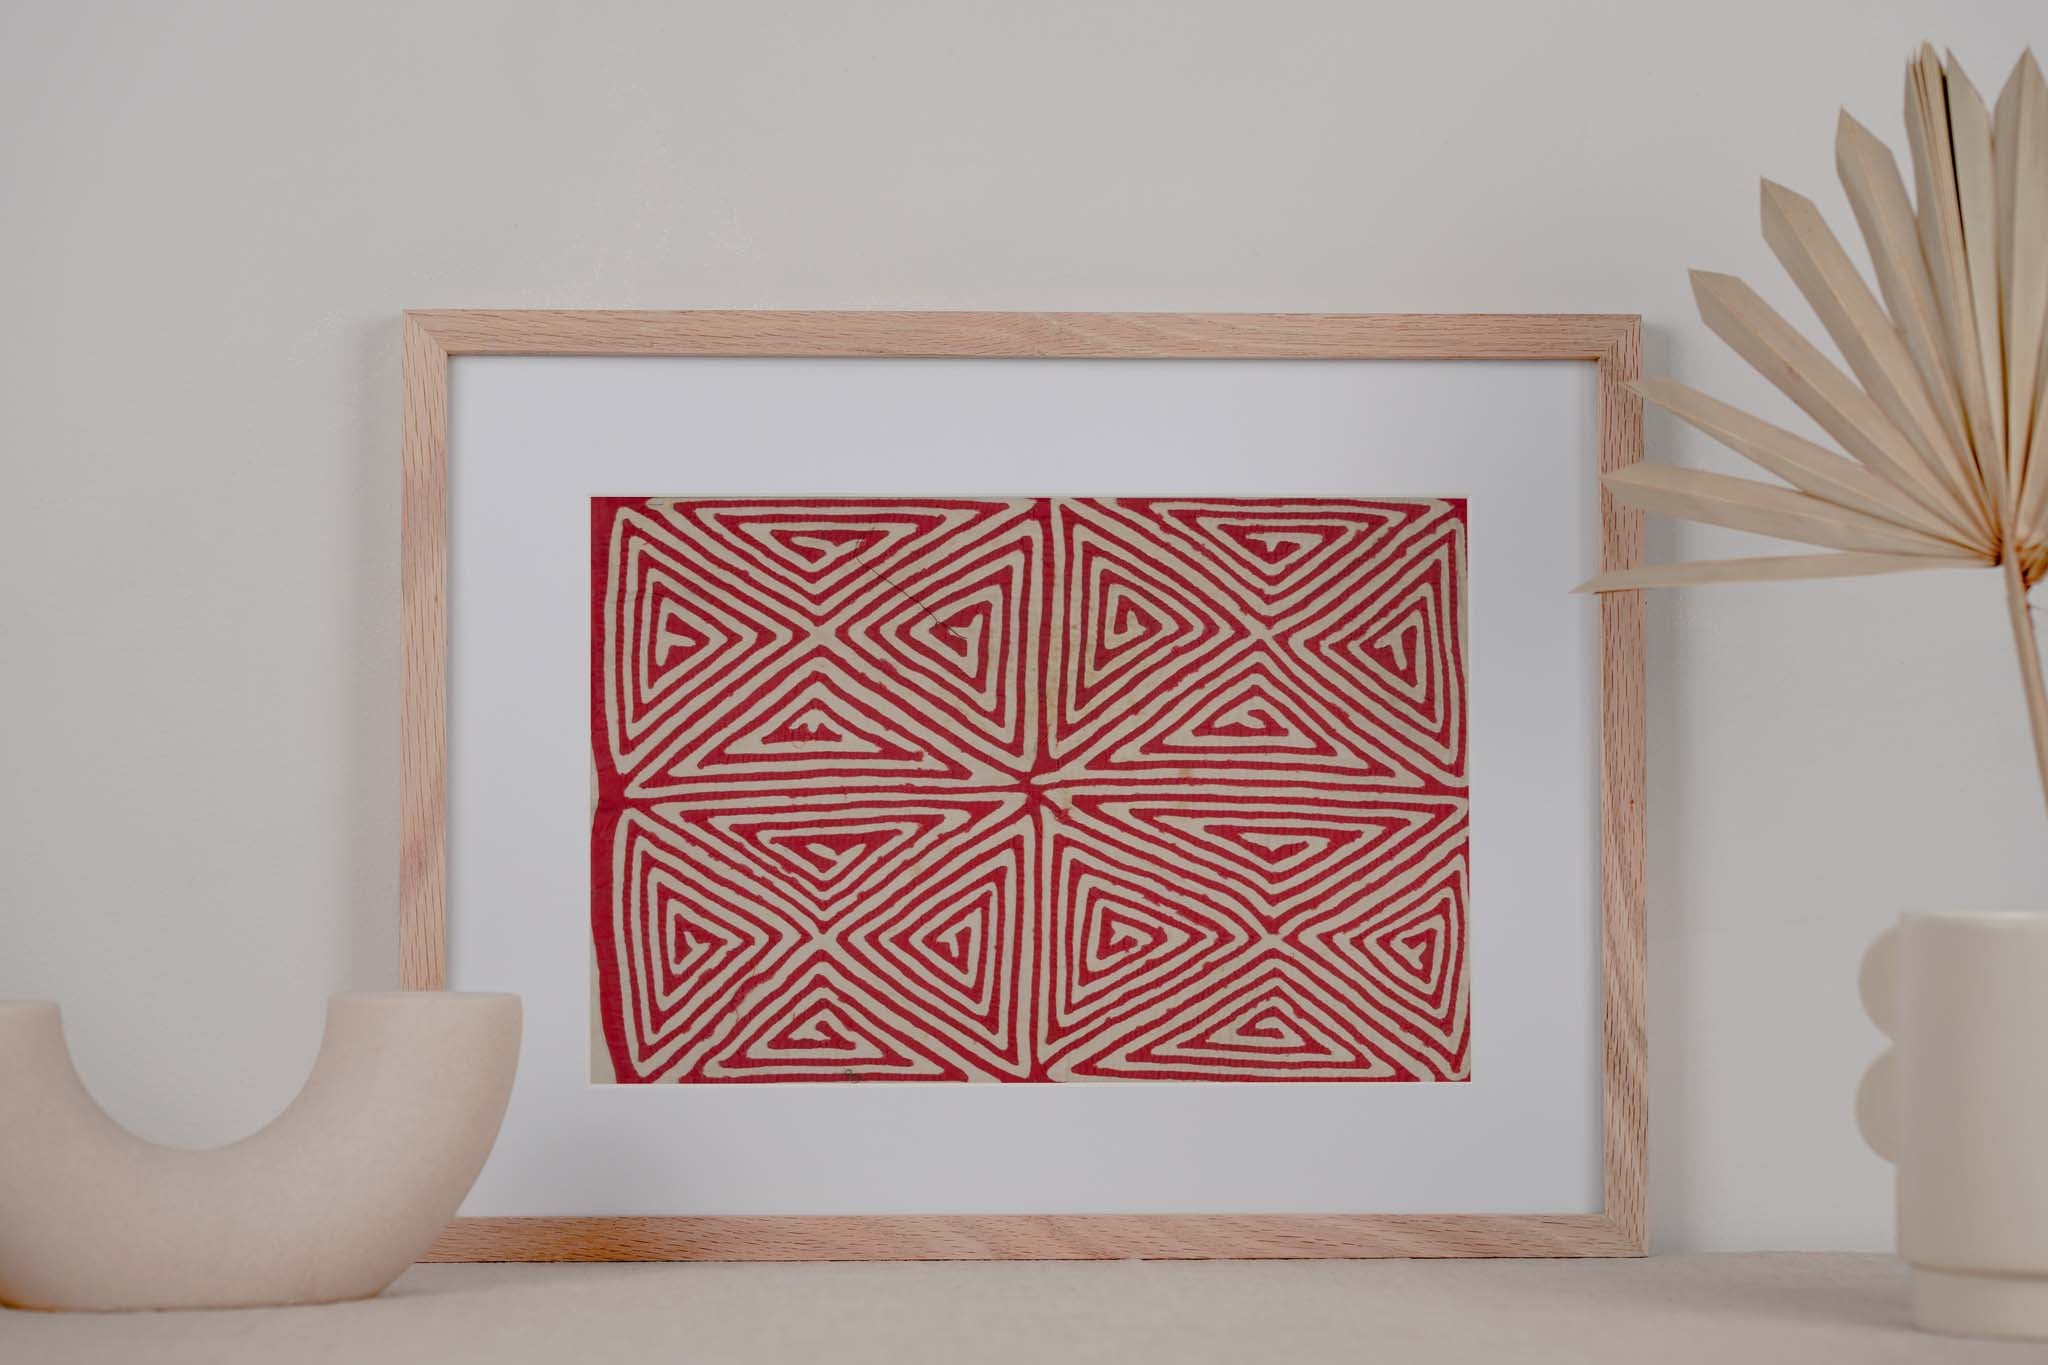 Vintage Red And White Classic Design Mola